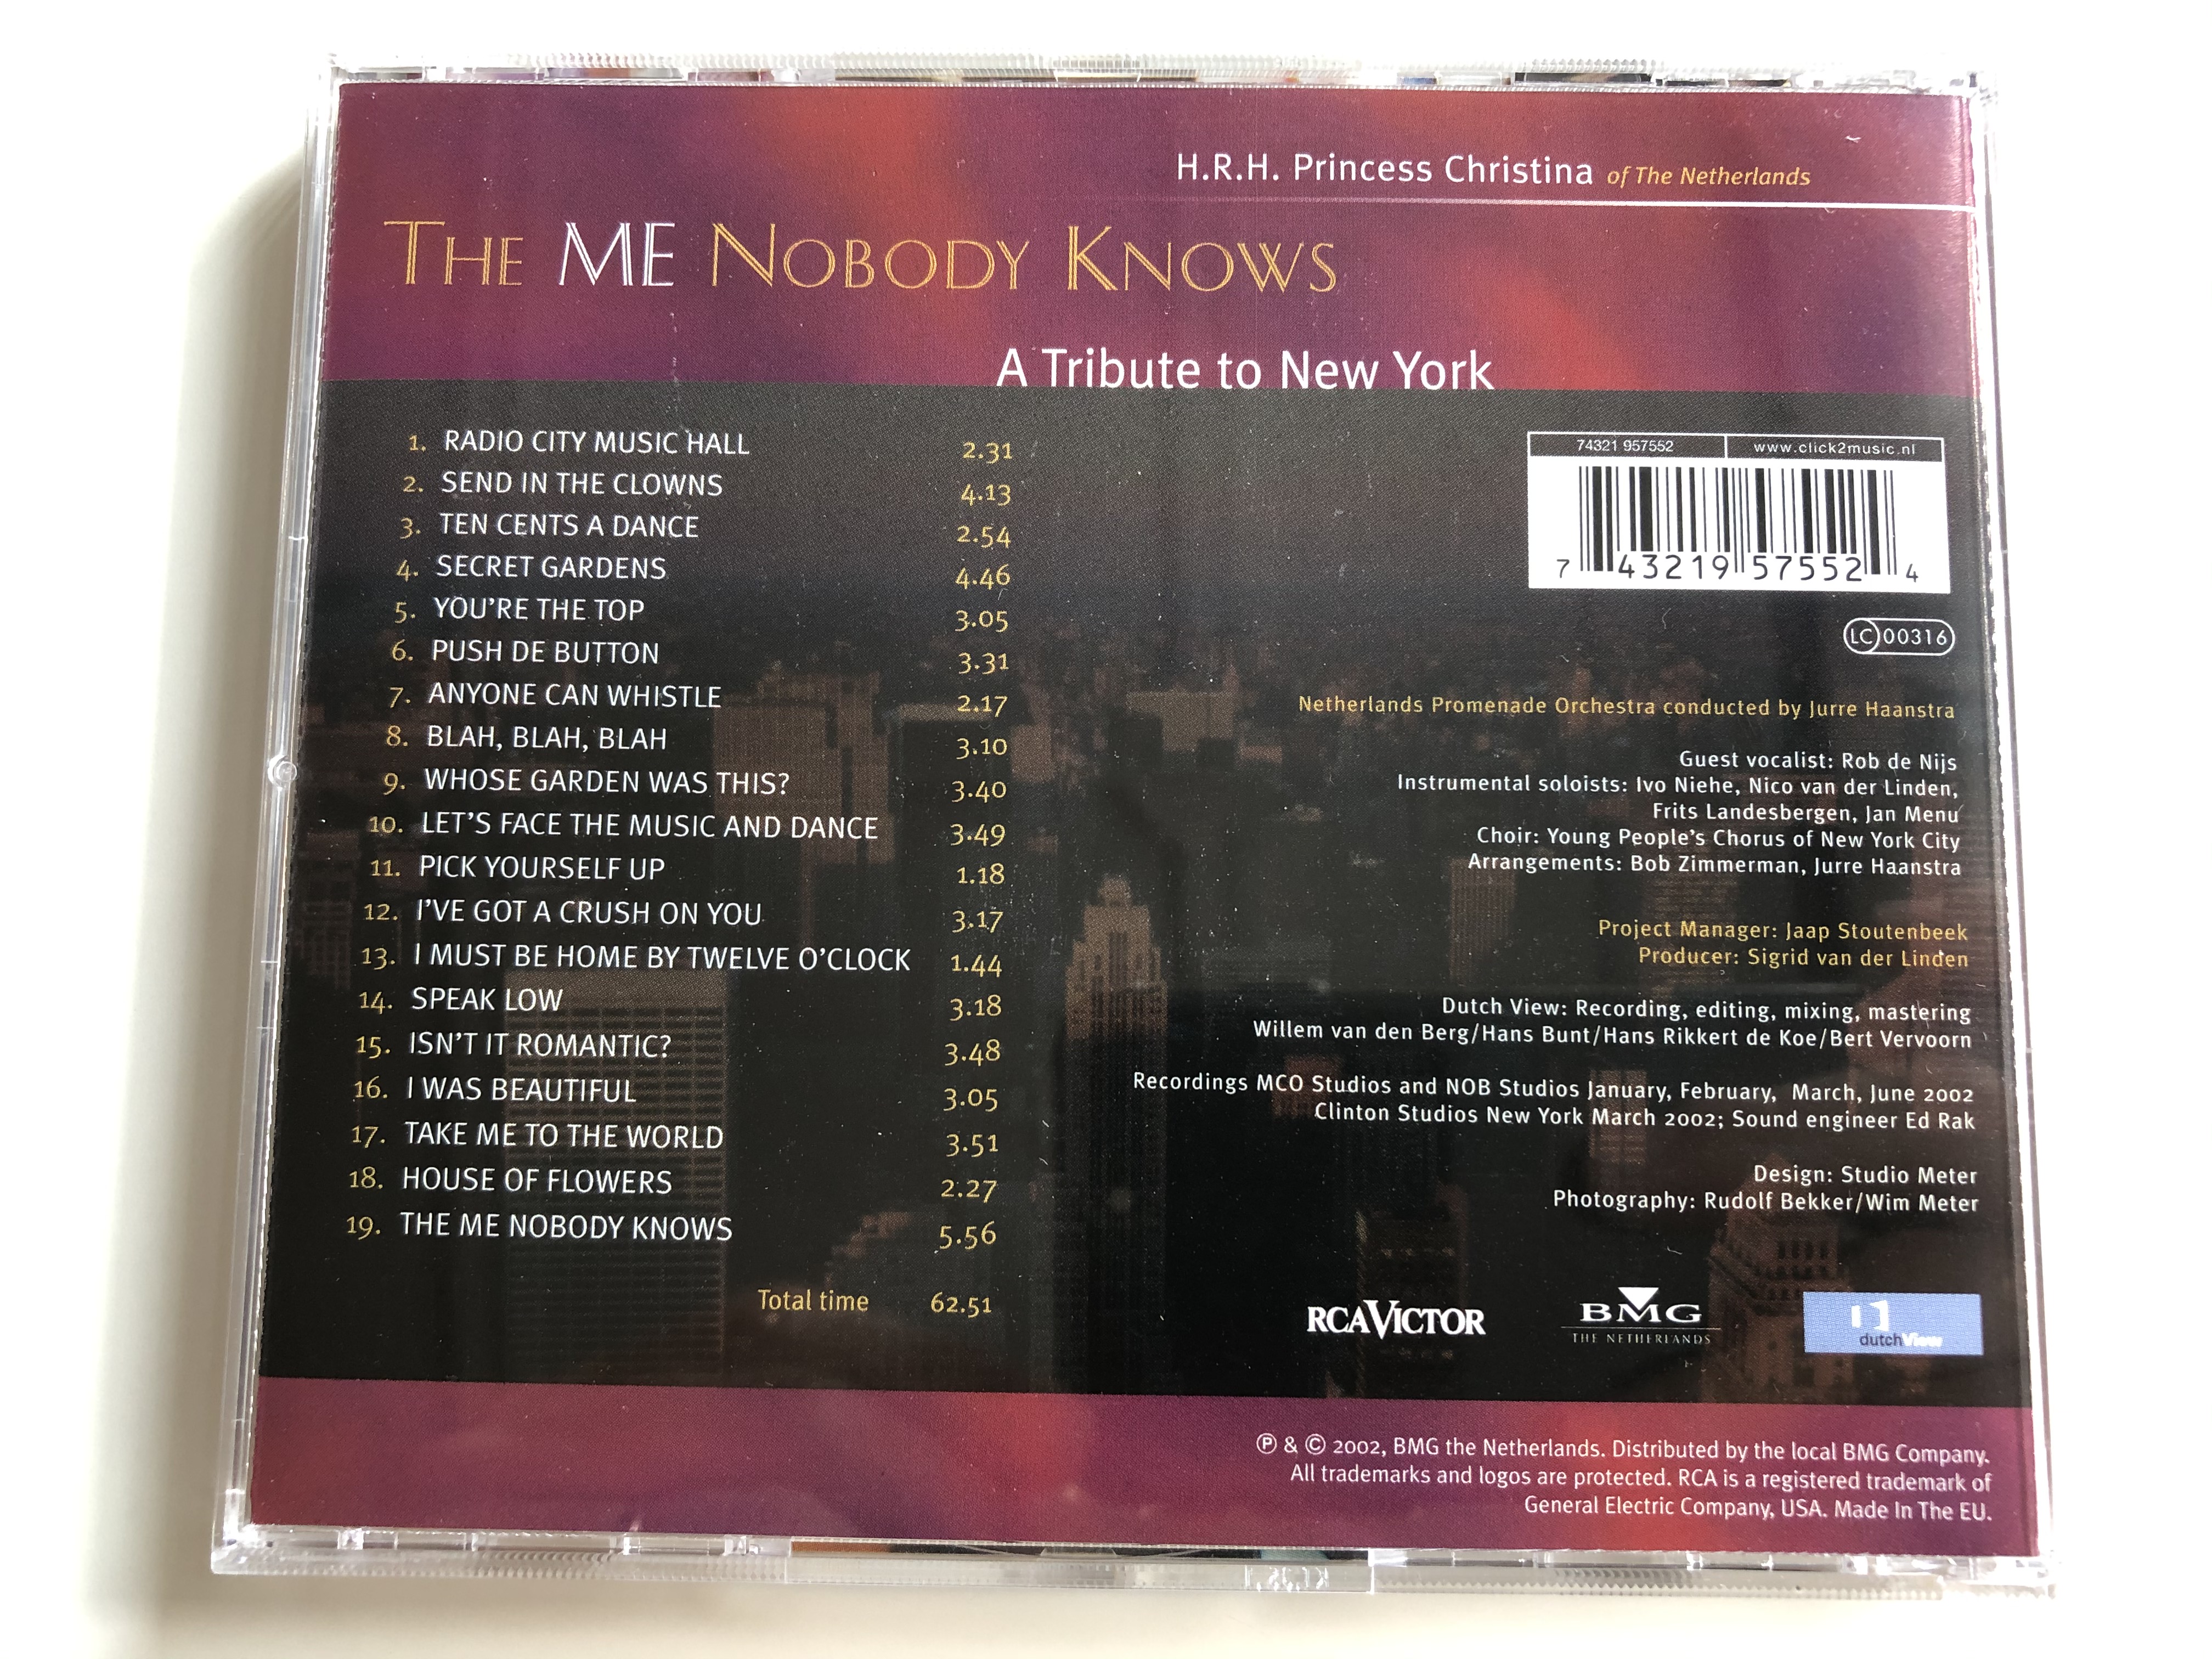 the-me-nobody-knows-a-tribute-to-new-york-nederlands-promenade-orchestra-conducted-by-jurre-haanstra-rca-victor-audio-cd-2002-74321-957552-14-.jpg